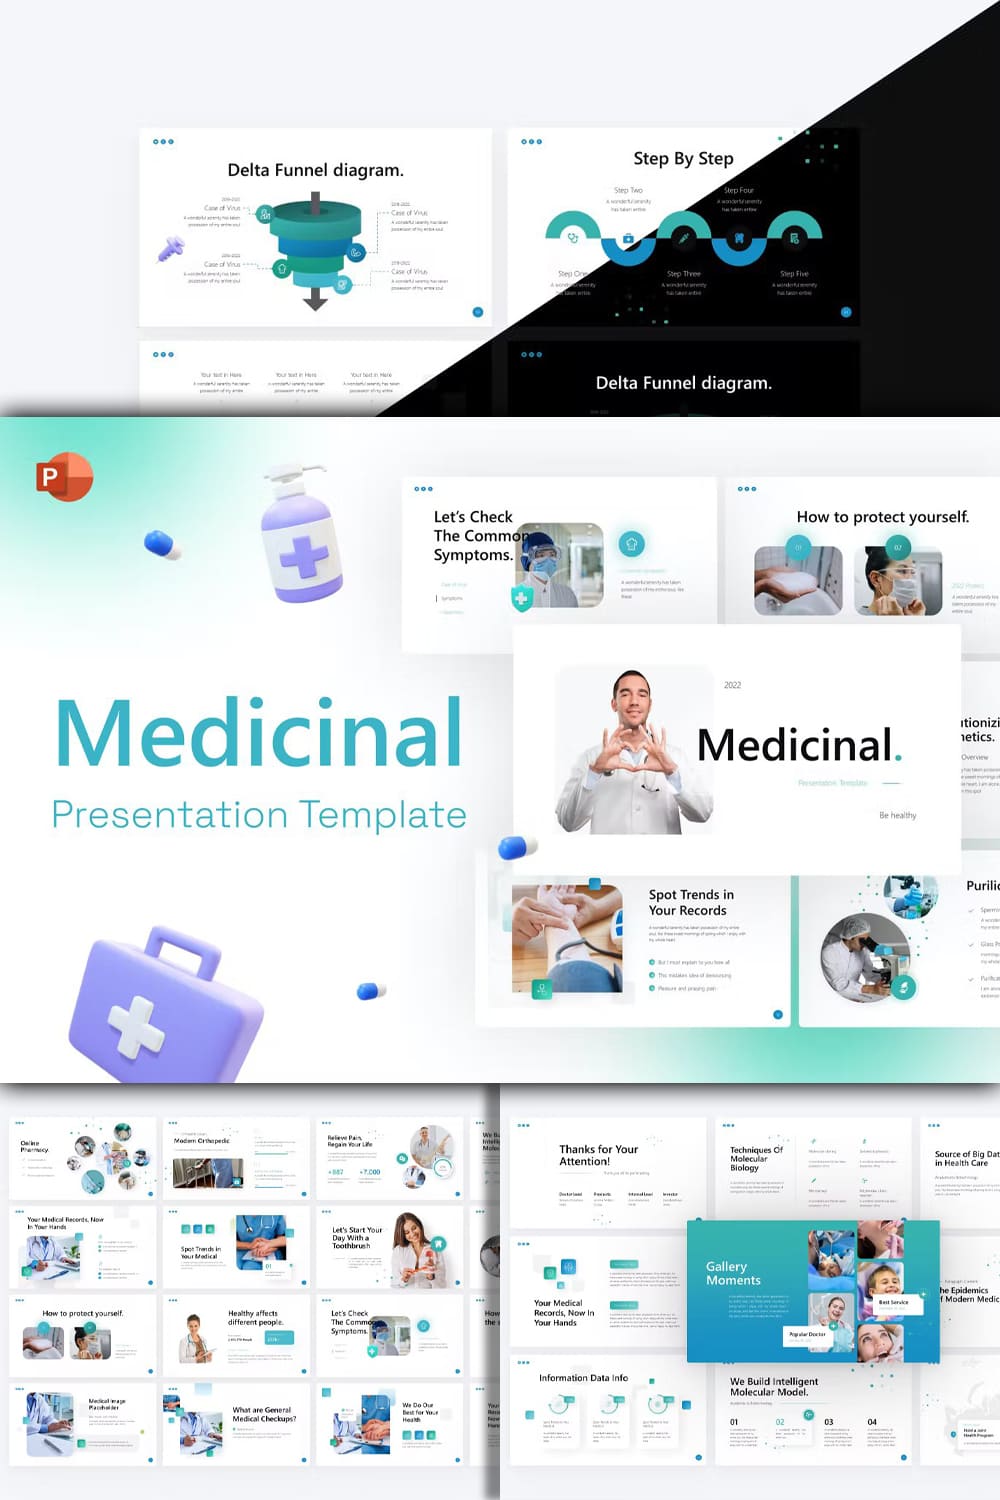 Medicinal 3d illustration powerpoint template - pinterest image preview.